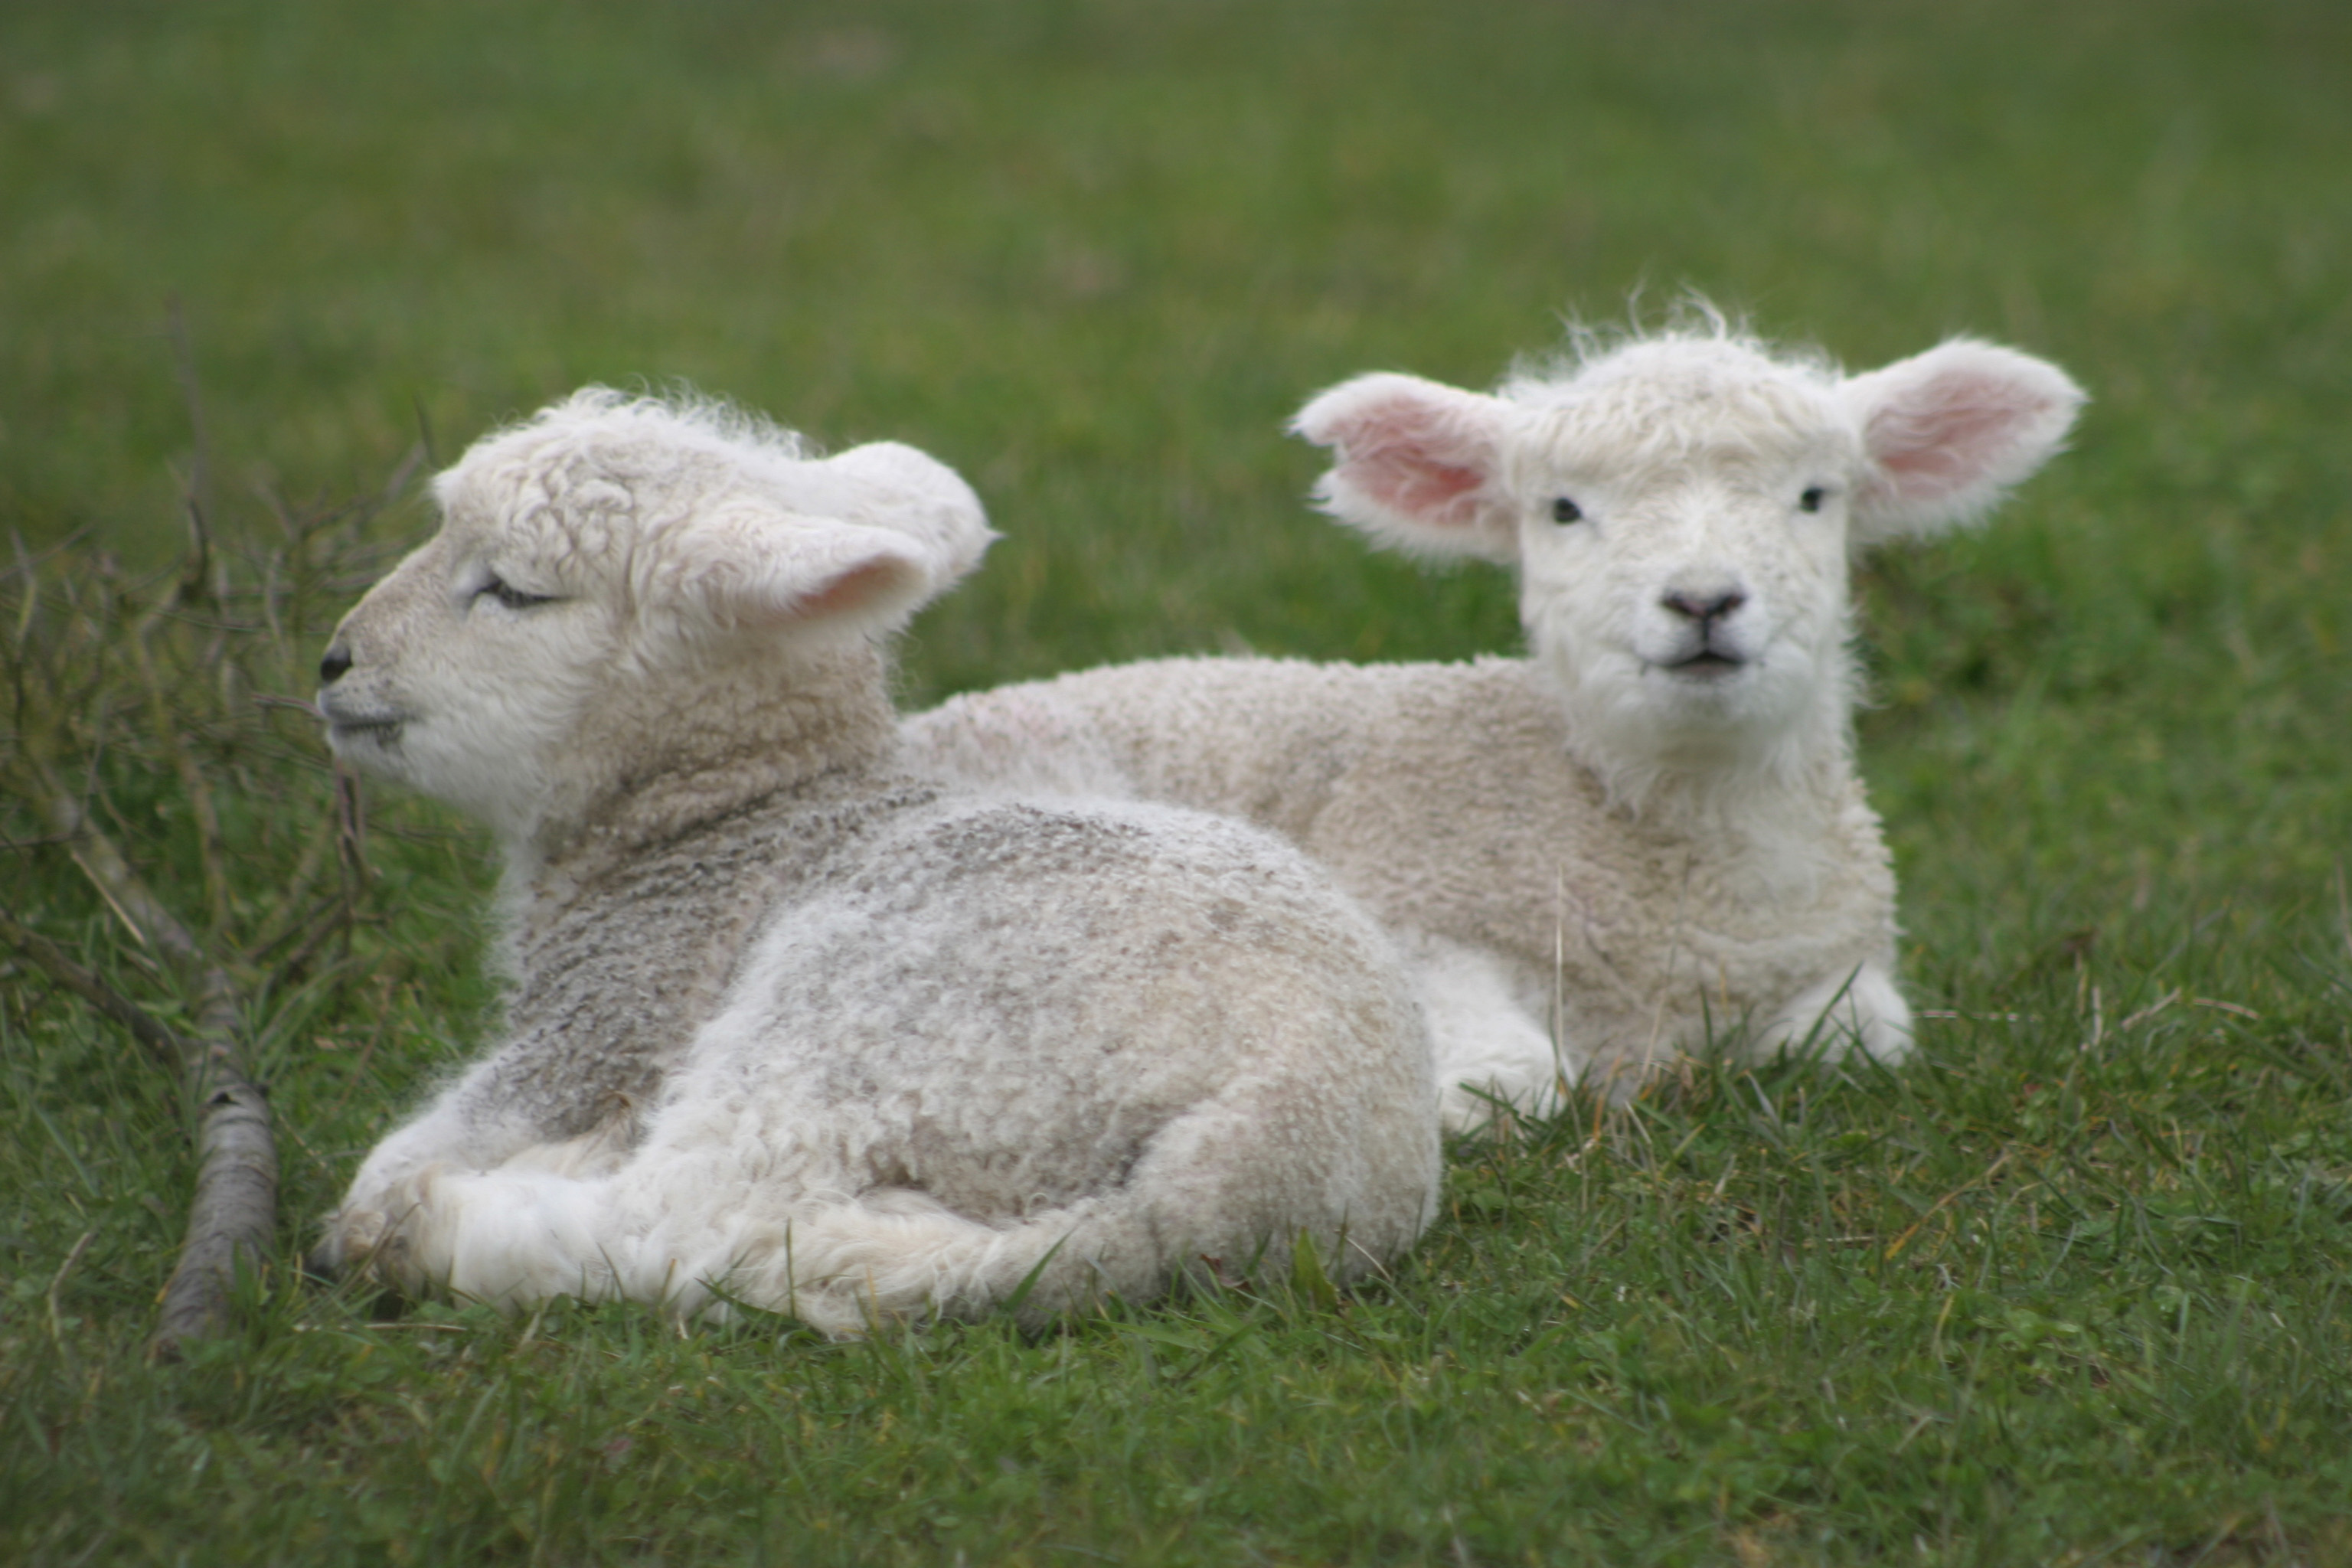 photograph of two young lambs